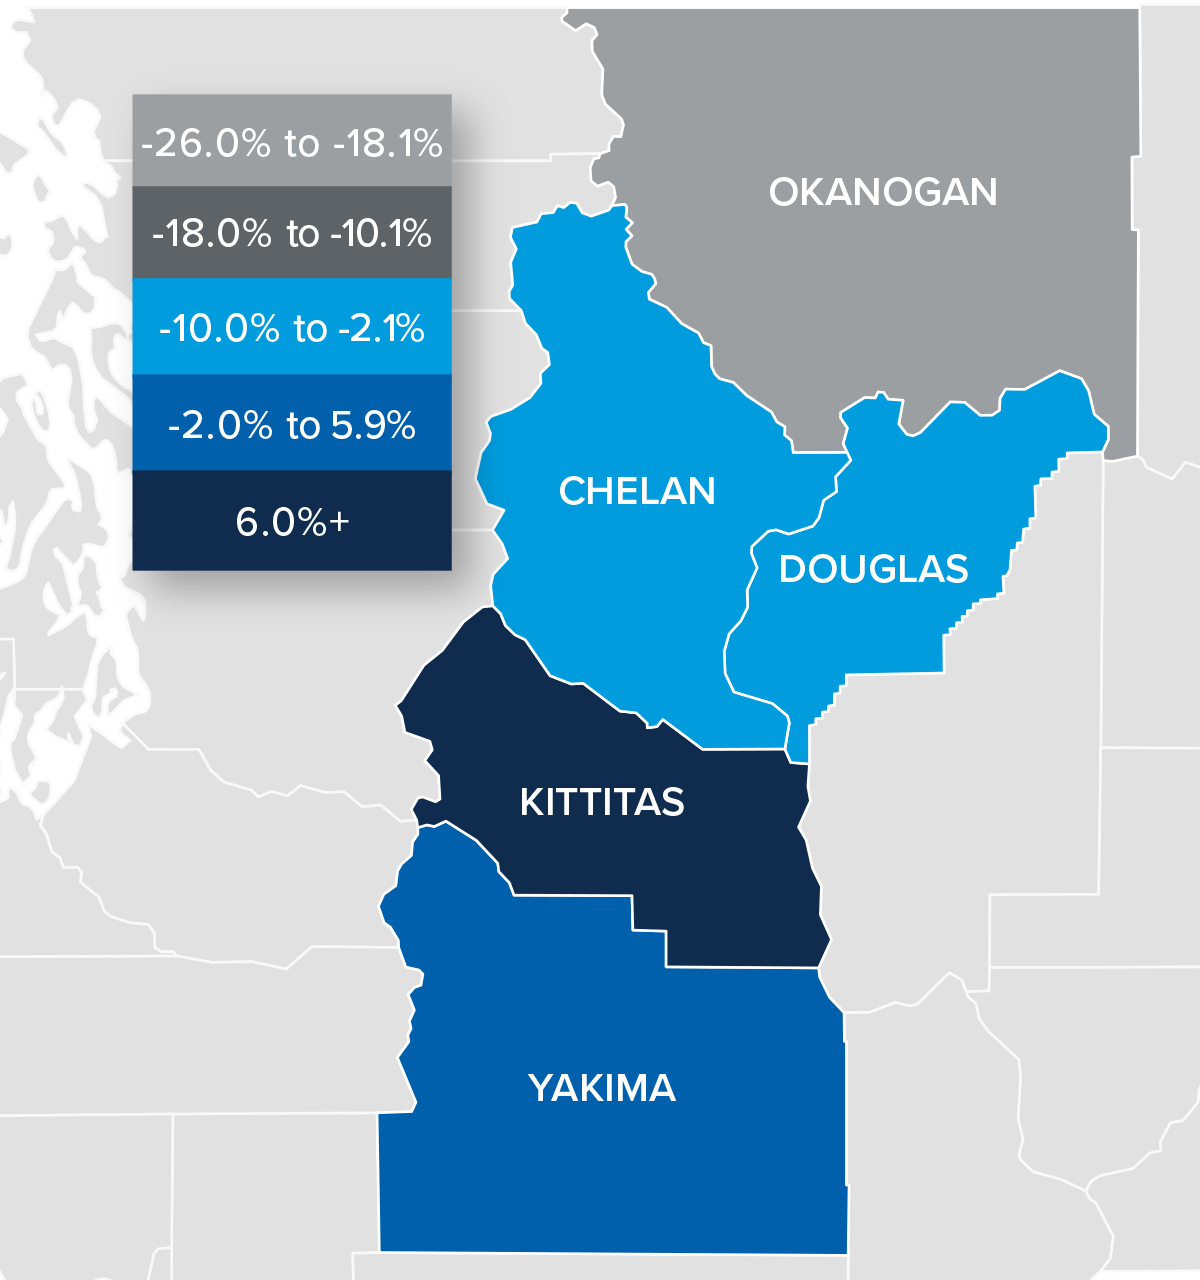 A map showing the real estate home prices percentage changes for various counties in Central Washington. Different colors correspond to different tiers of percentage change. Okanogan County has a percentage change in the -26% to -18.1% range, Chelan and Douglas are in the -10% to -2.1% change range, Yakima is in the -2% to 5.9% change range, and Kittitas in the 6%+ change range.